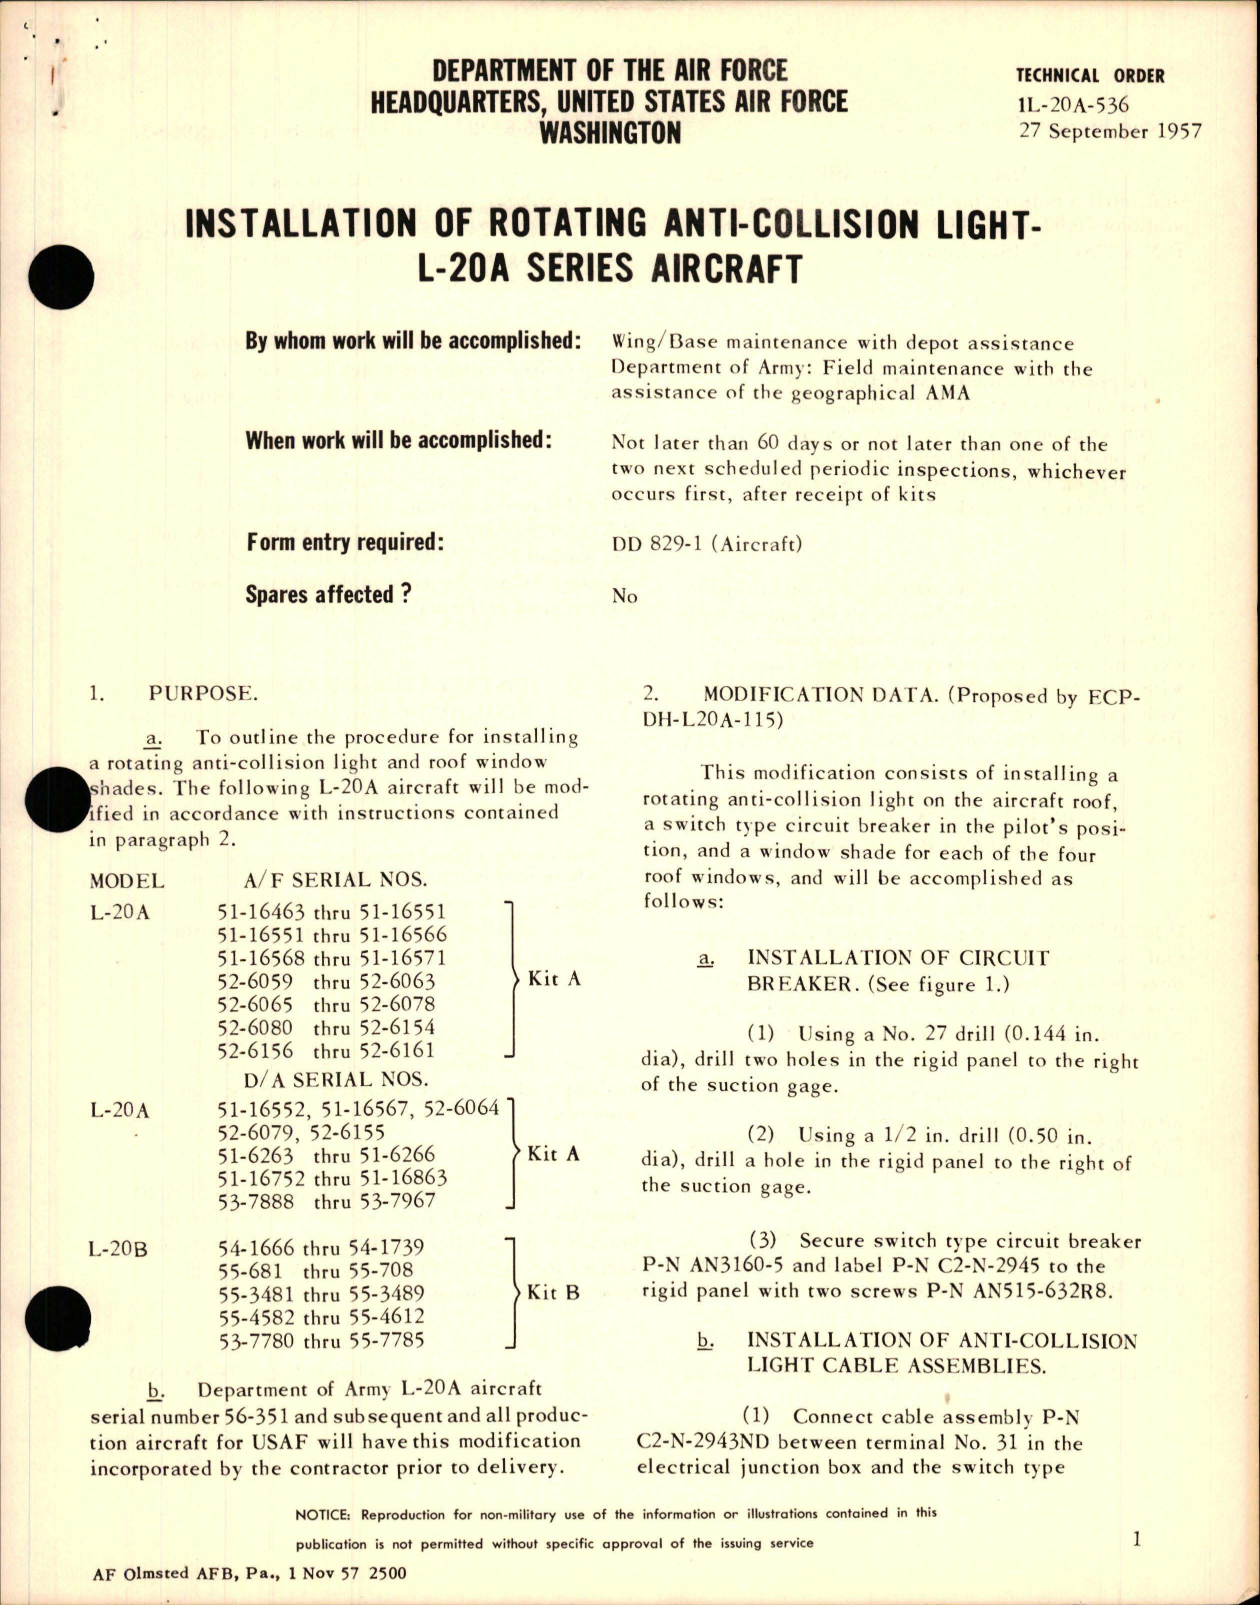 Sample page 1 from AirCorps Library document: Installation of Rotating Anti-Collision Light - L-20A Series